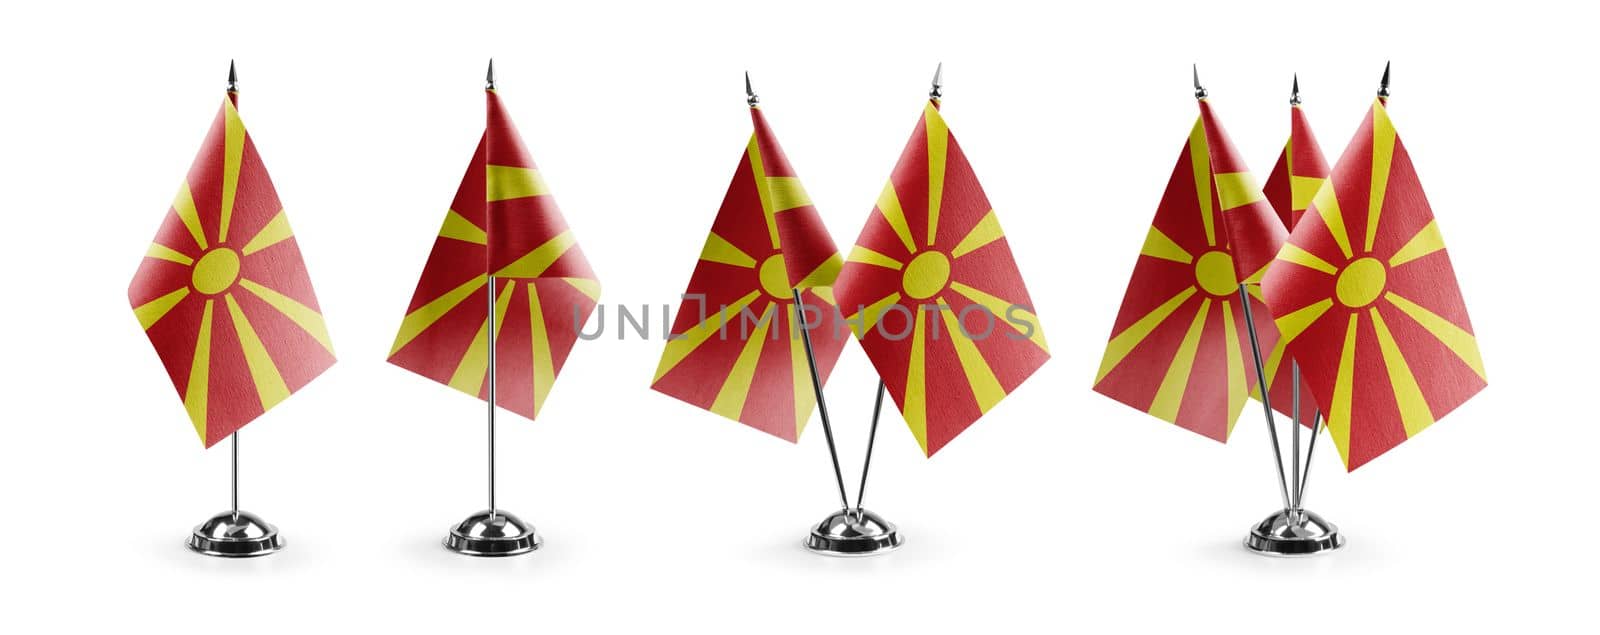 Small national flags of the Macedonia on a white background by butenkow